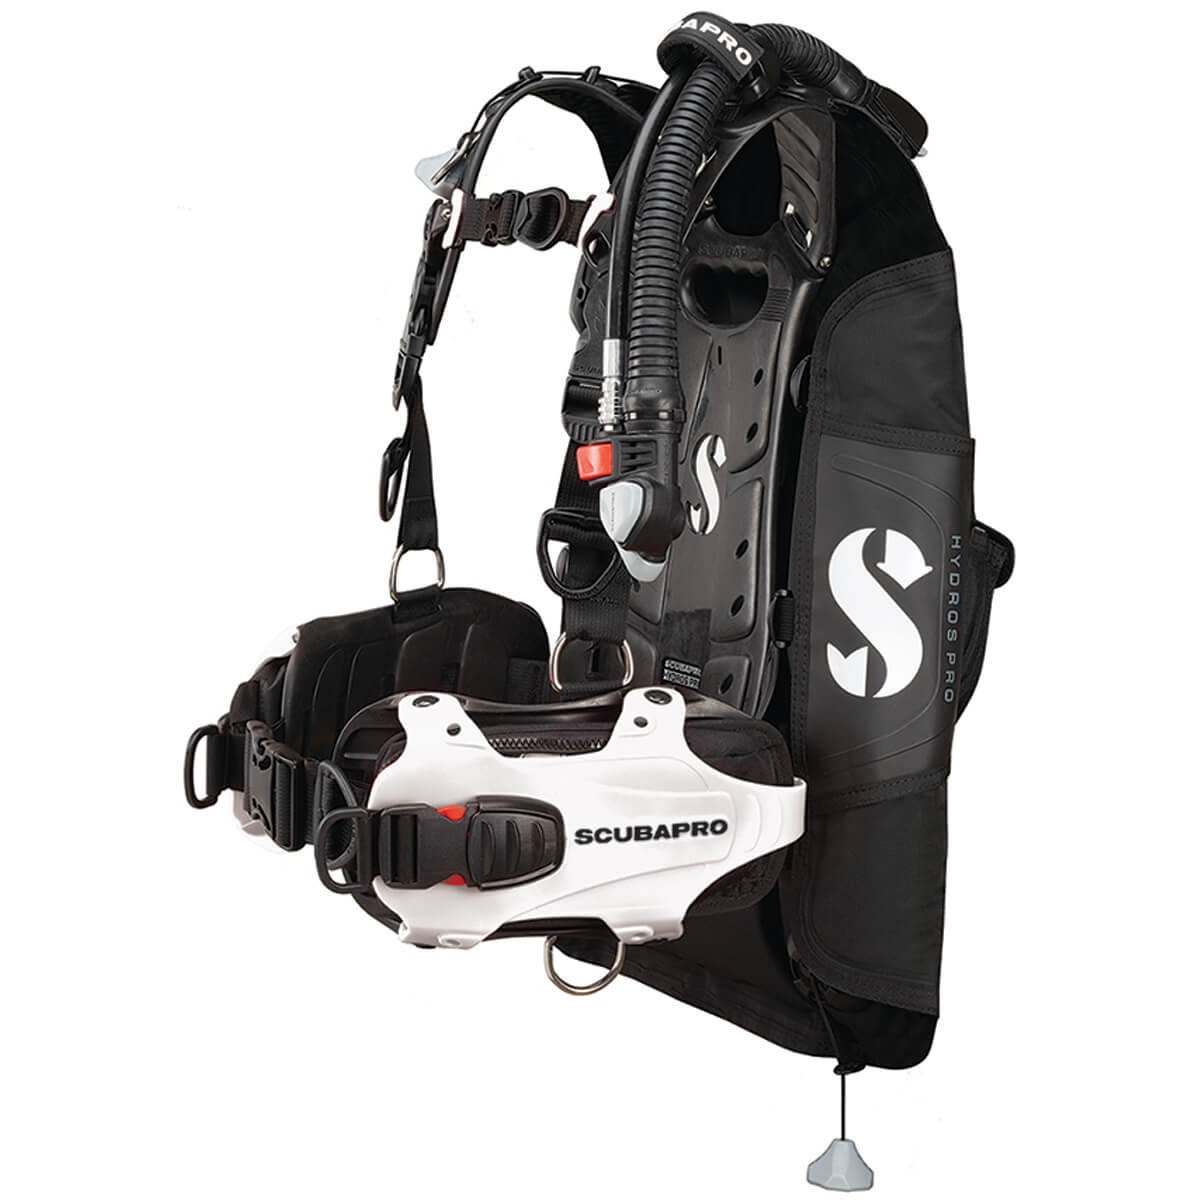 Scubapro Hydros Pro BCD For Sale Online in Canada with Free Shipping